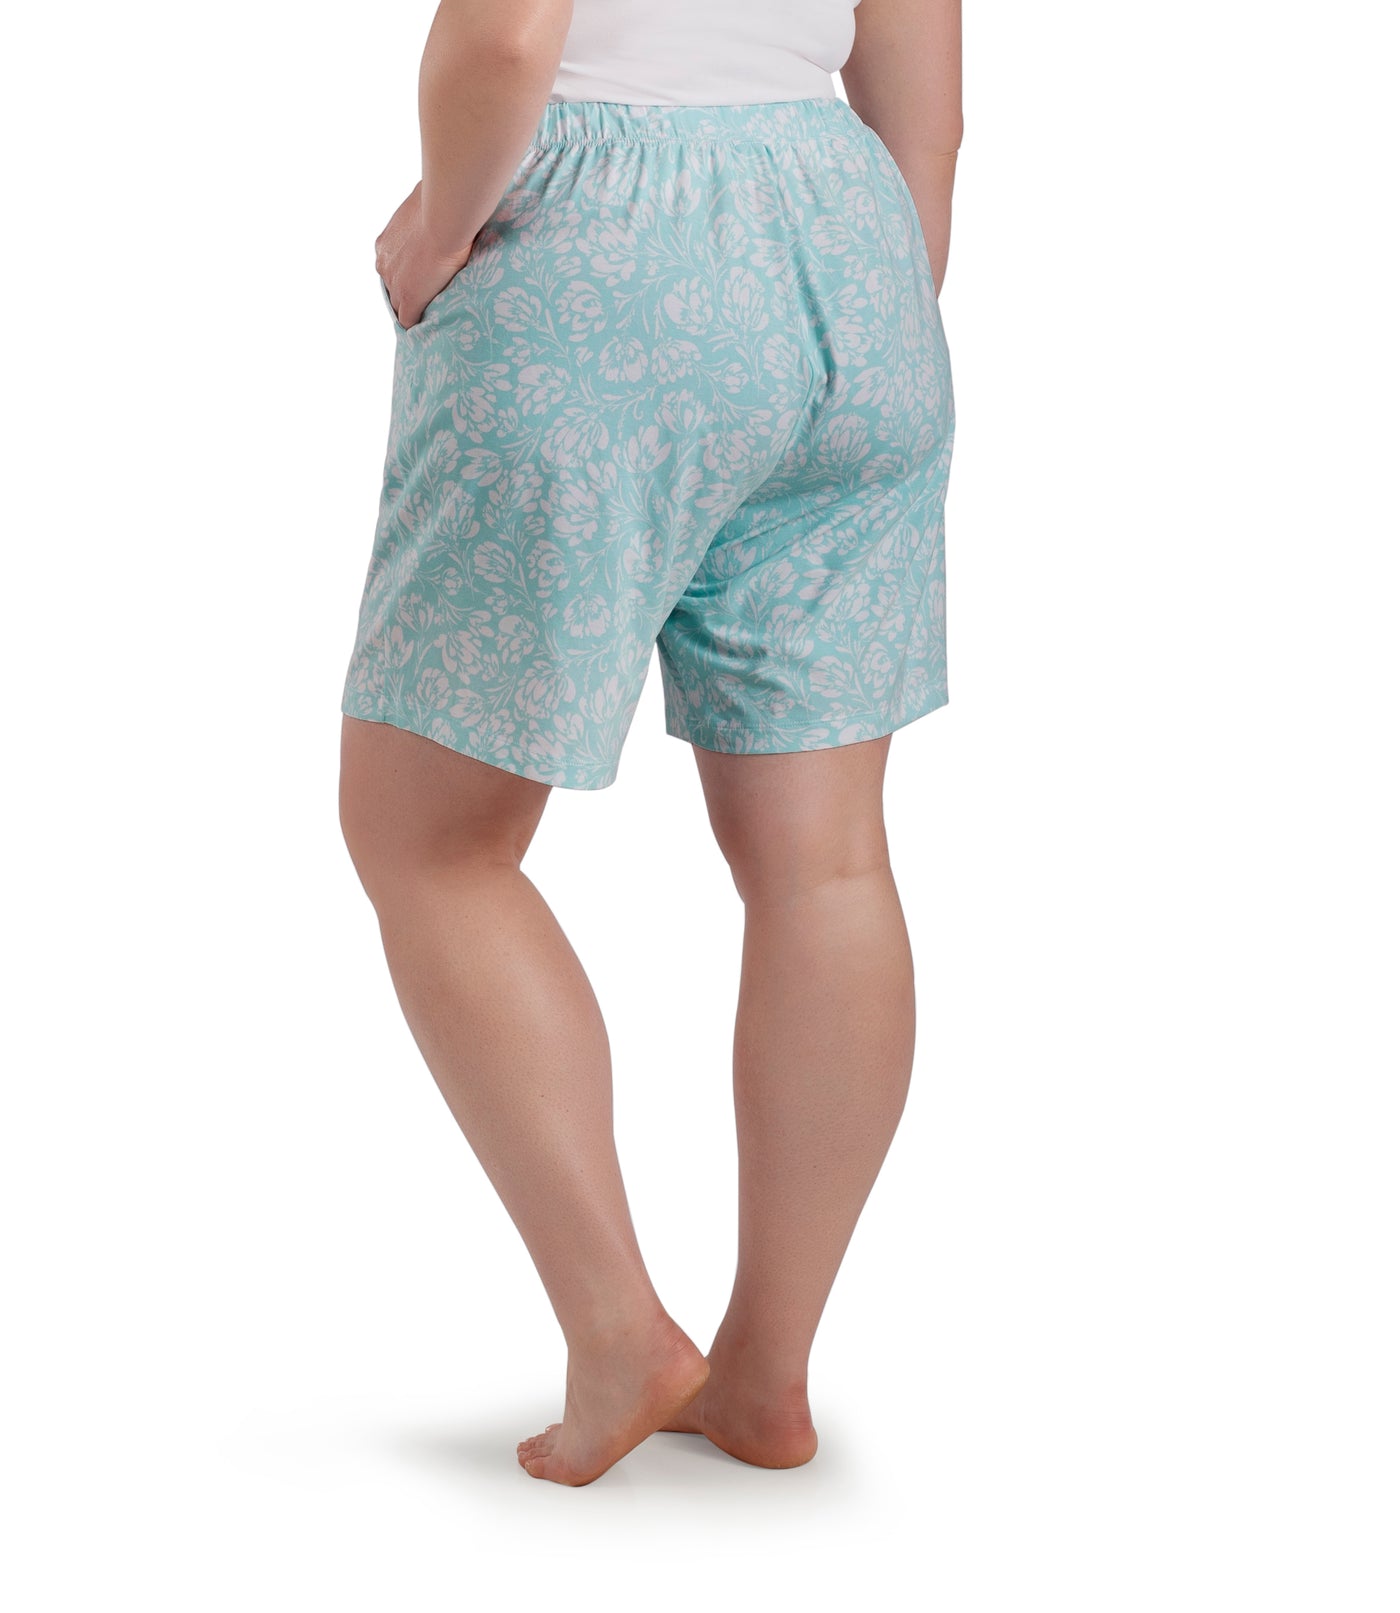 Bottom half of plus sized woman, facing back, wearing JunoActive JunoBliss Pocketed Sleep Shorts Spring Blue Floral Print. These shorts are longer and hemline comes to a few inches above knees and have pockets on both sides.